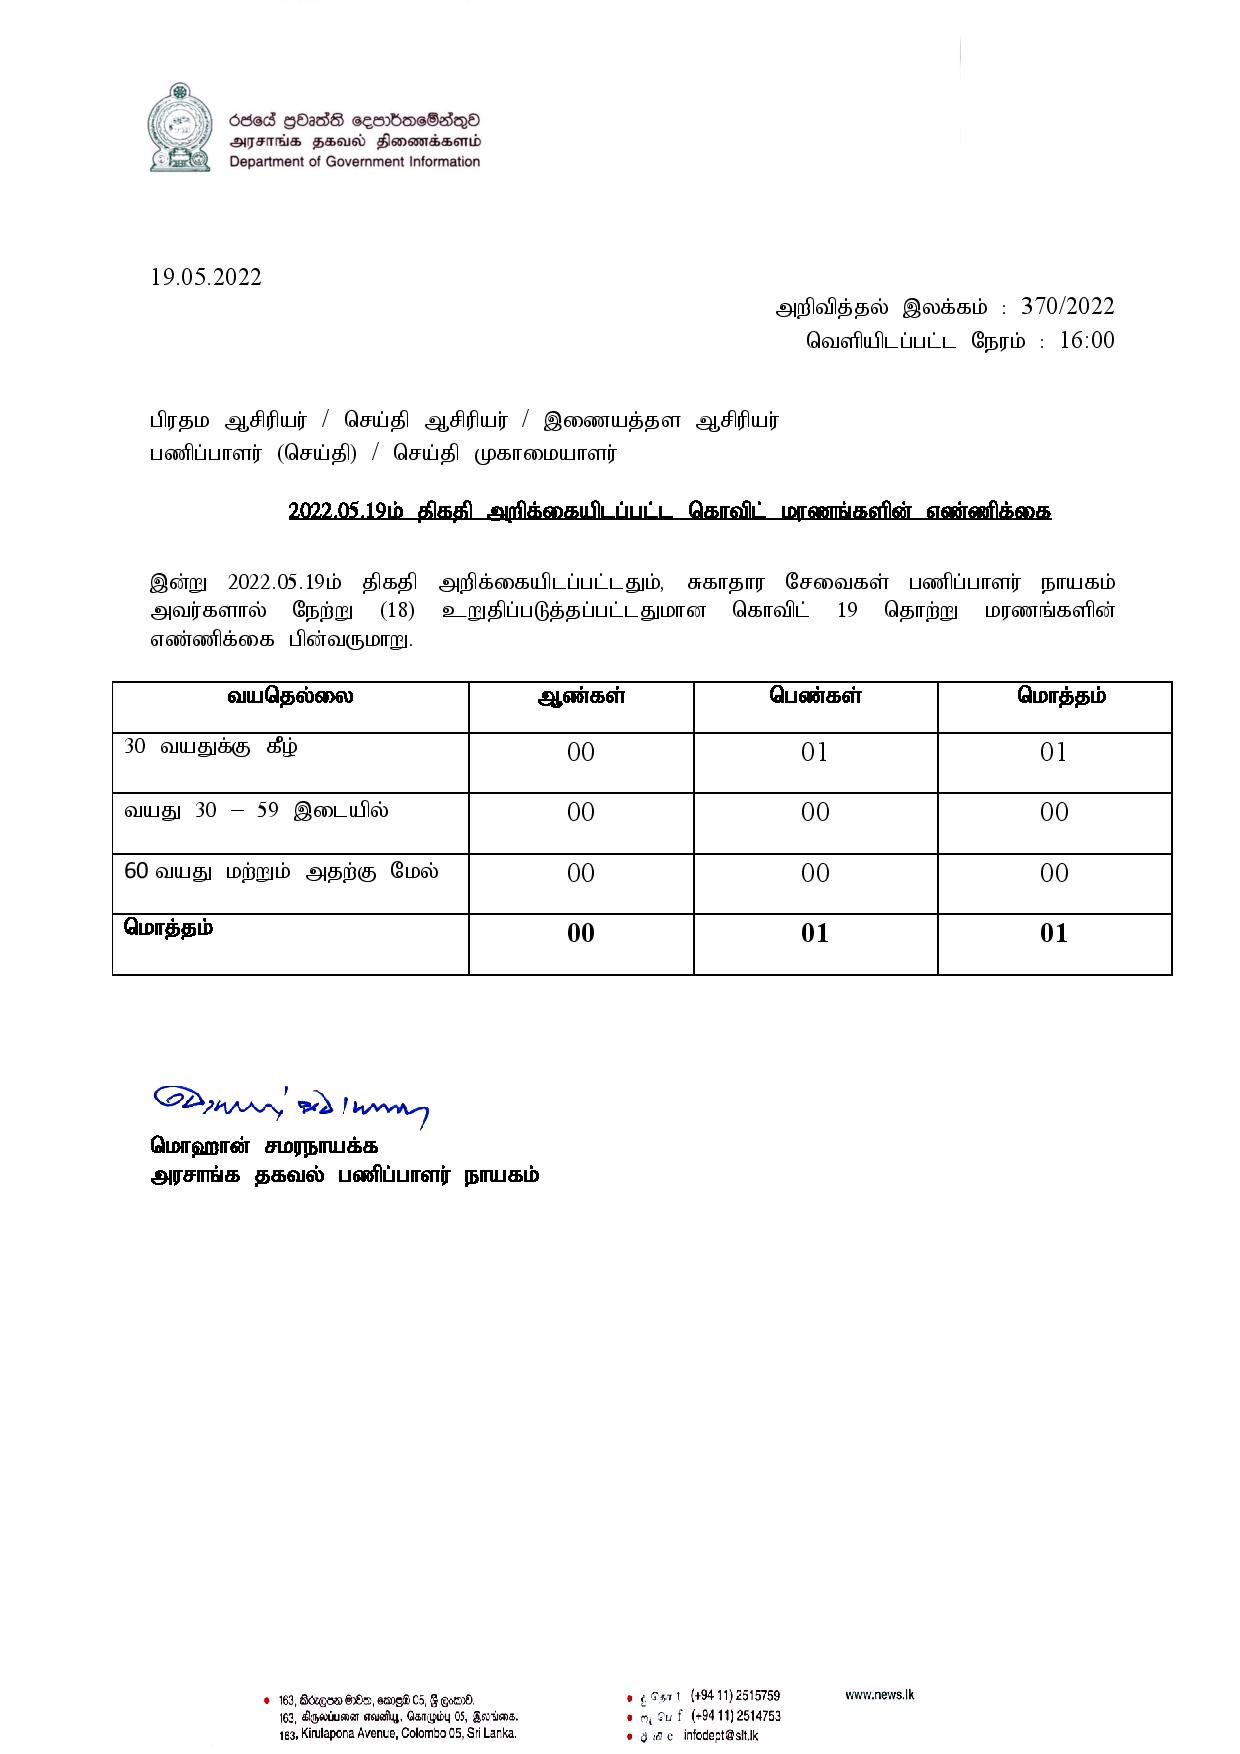 Release No 370 Tamil page 001